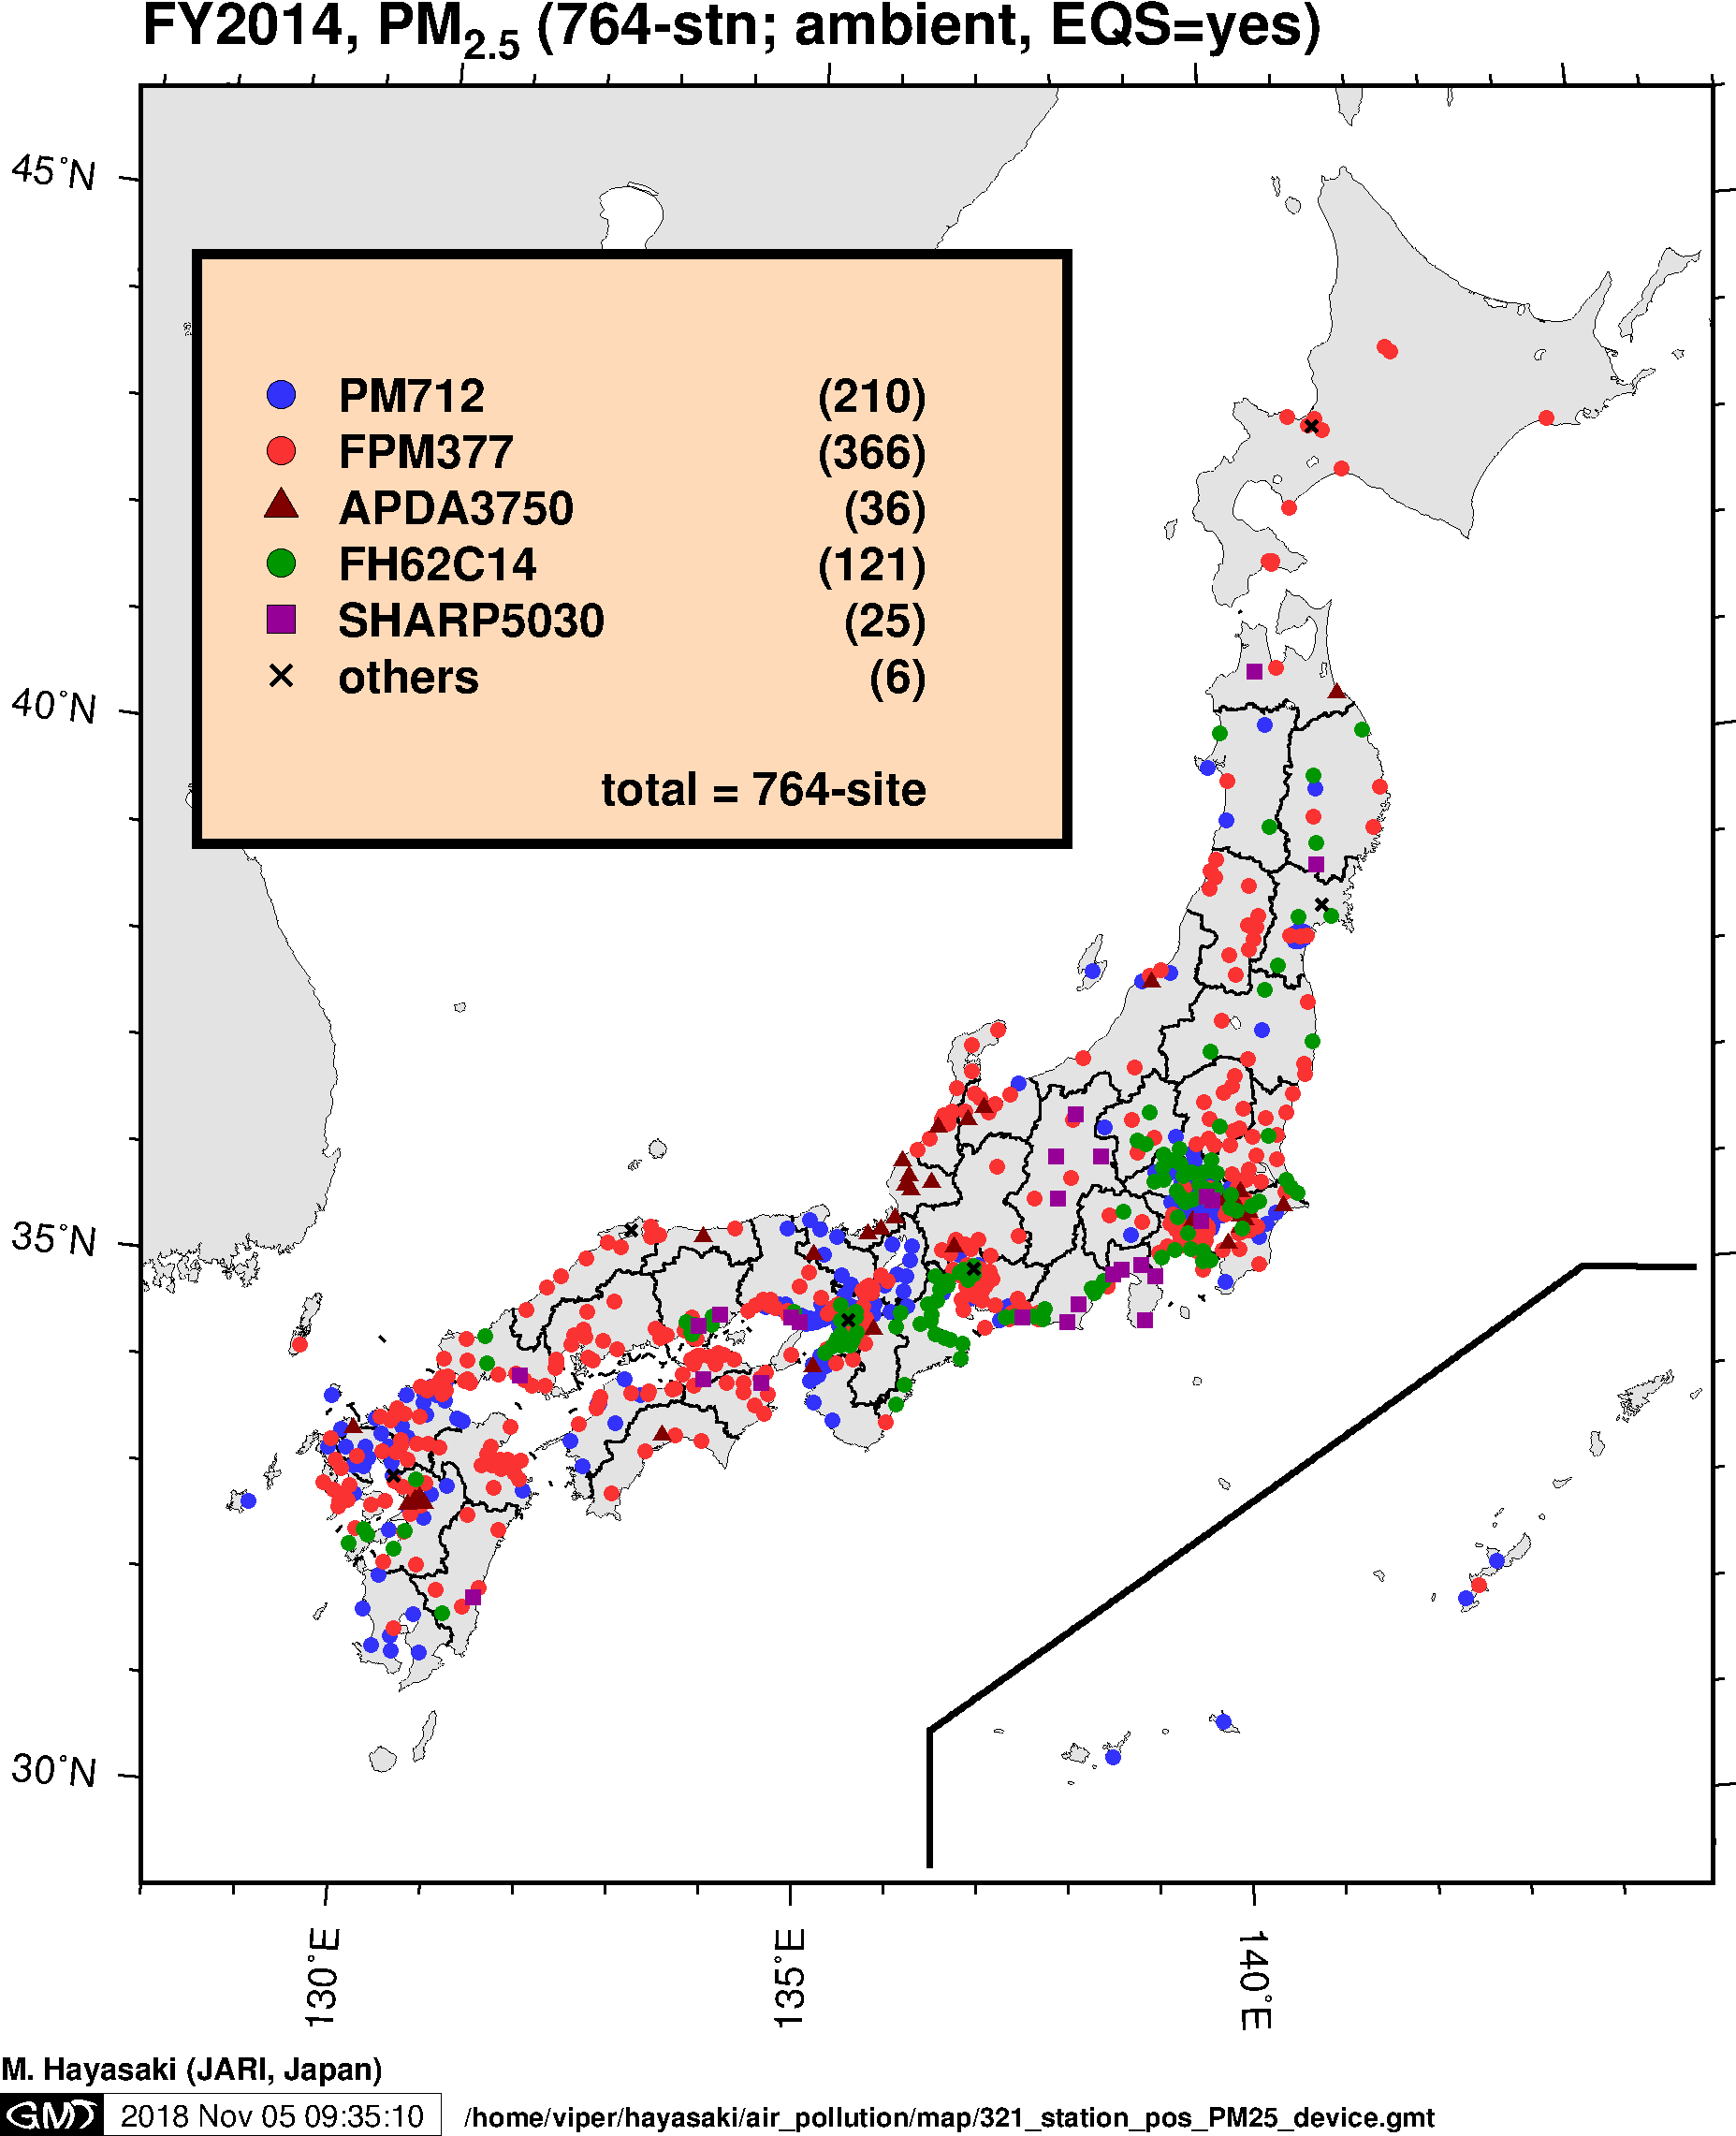 PM2.5 Monitoring devices in Japan (FY2014)